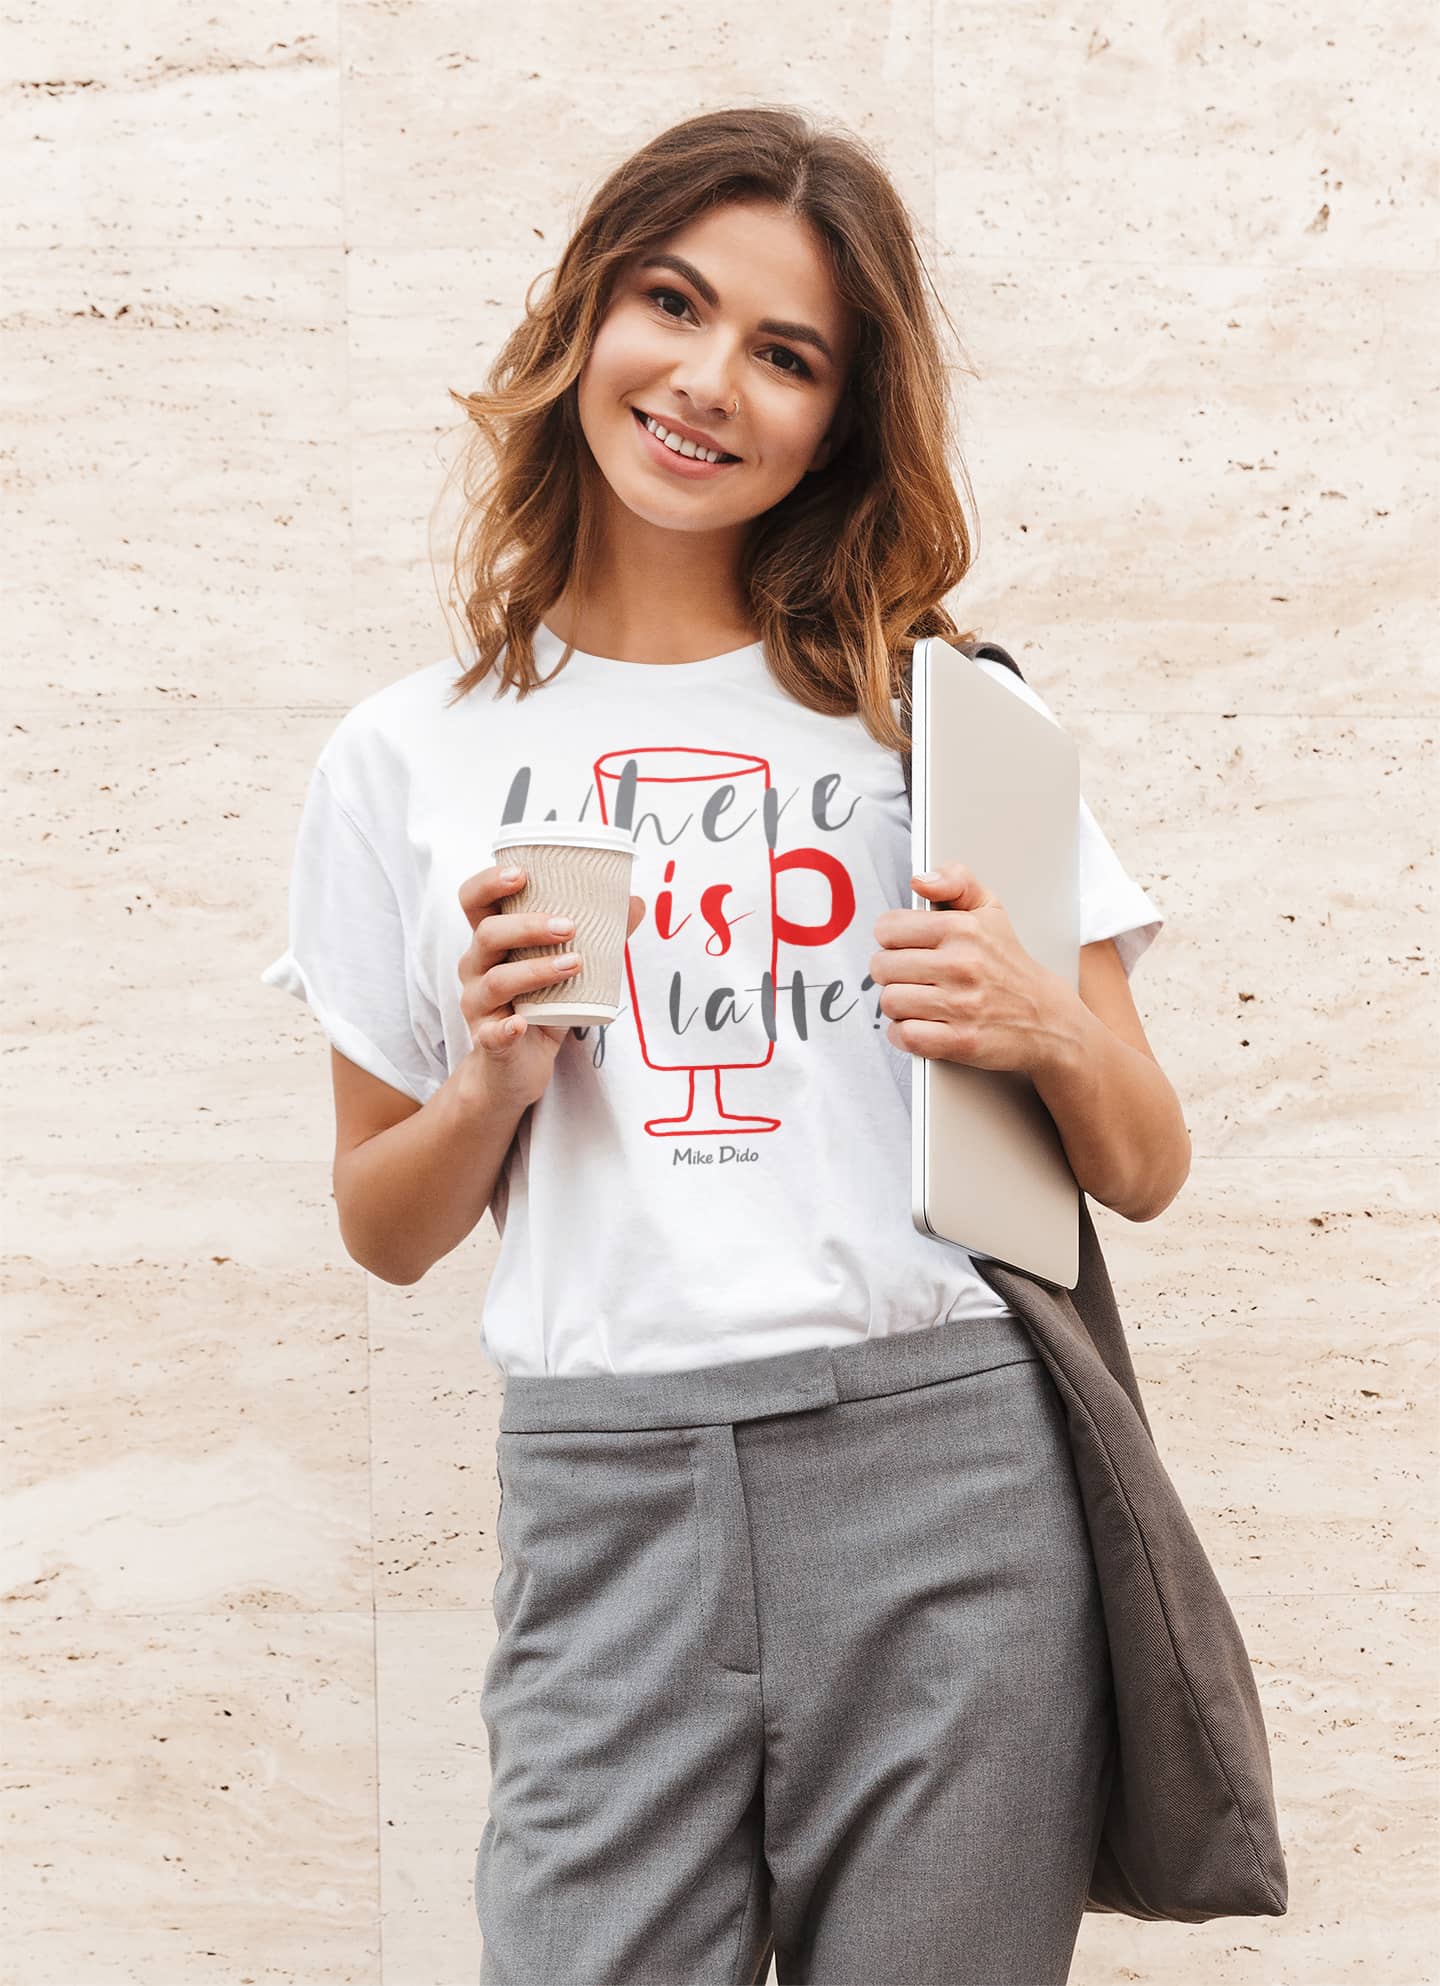 Woman T Shirt For Coffee Lovers by Mike Dido